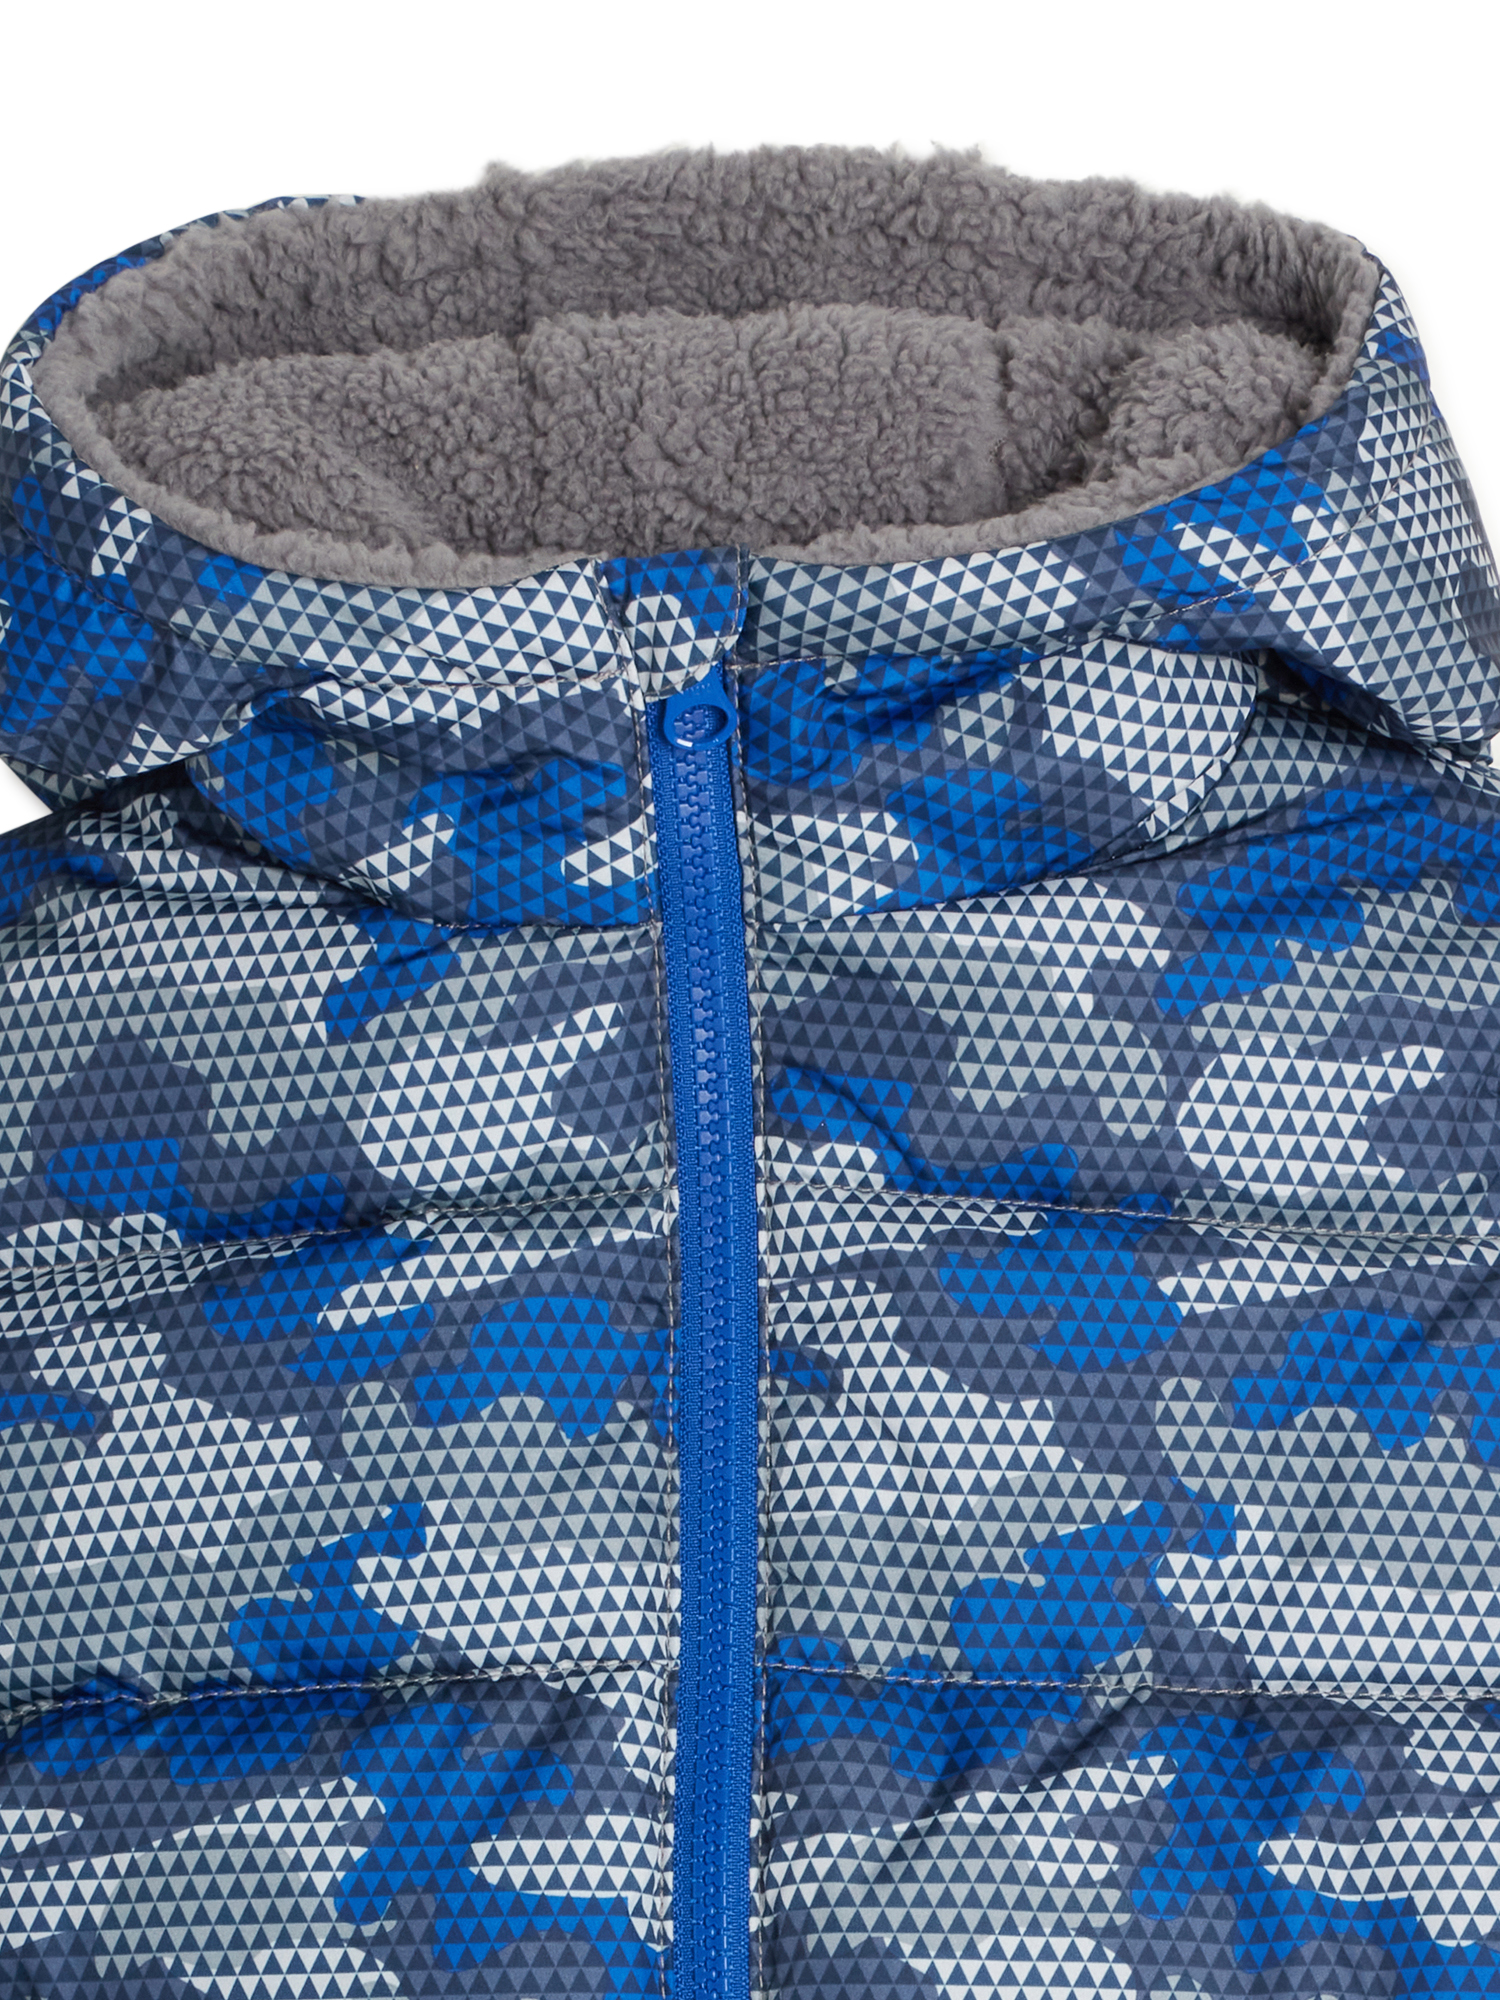 Swiss Tech Baby and Toddler Boy Puffer Jacket, Sizes 12M-5T - image 3 of 3